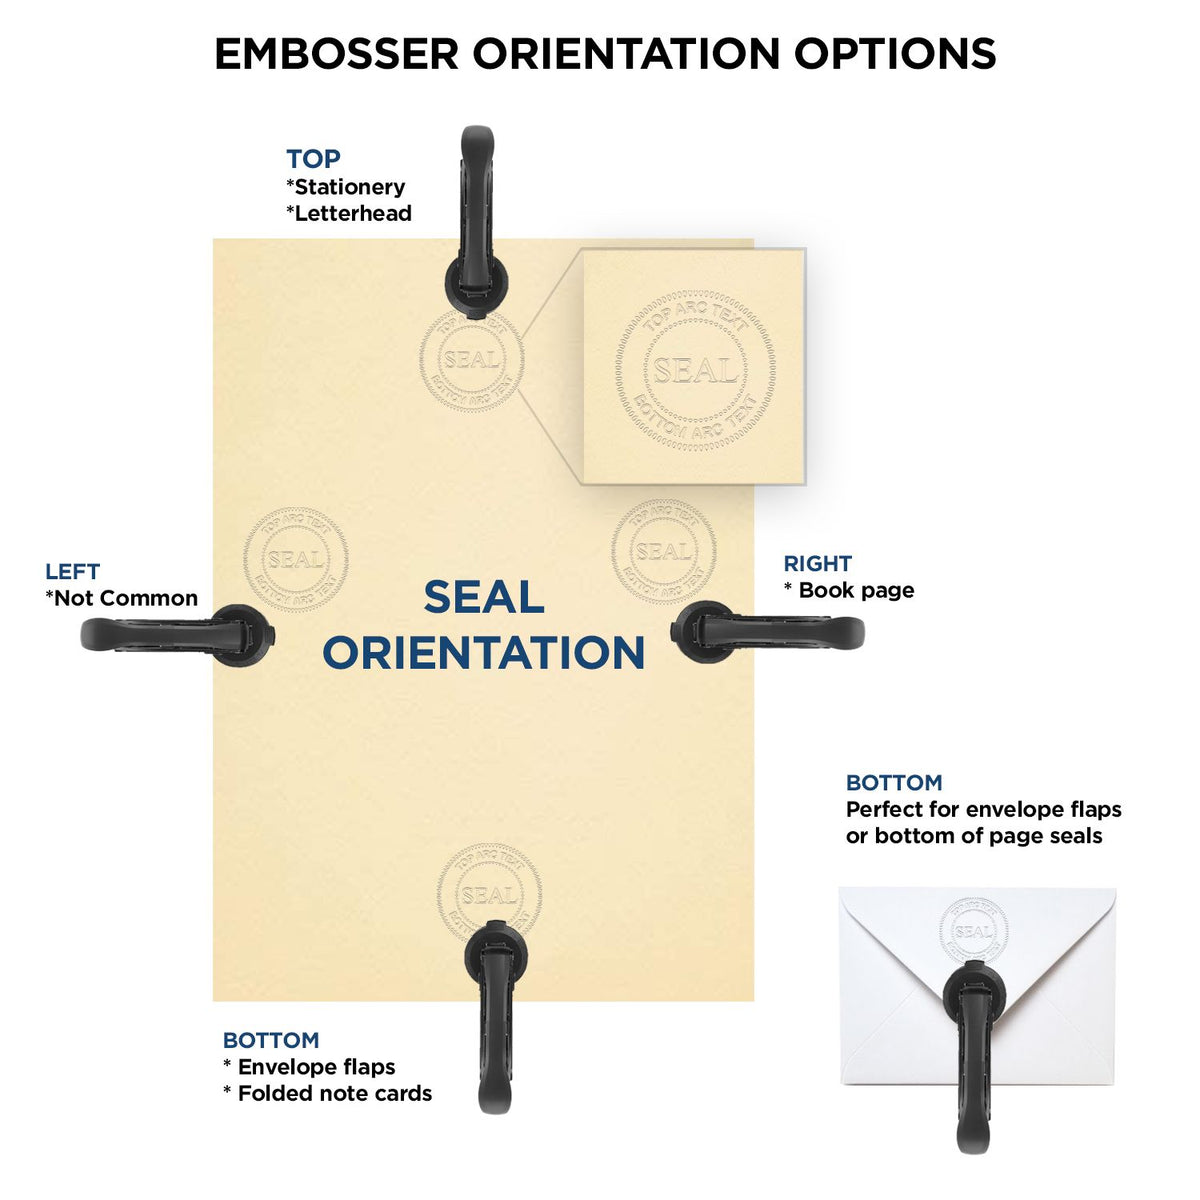 An infographic for the State of Pennsylvania Soft Land Surveyor Embossing Seal showing embosser orientation, this is showing examples of a top, bottom, right and left insert.